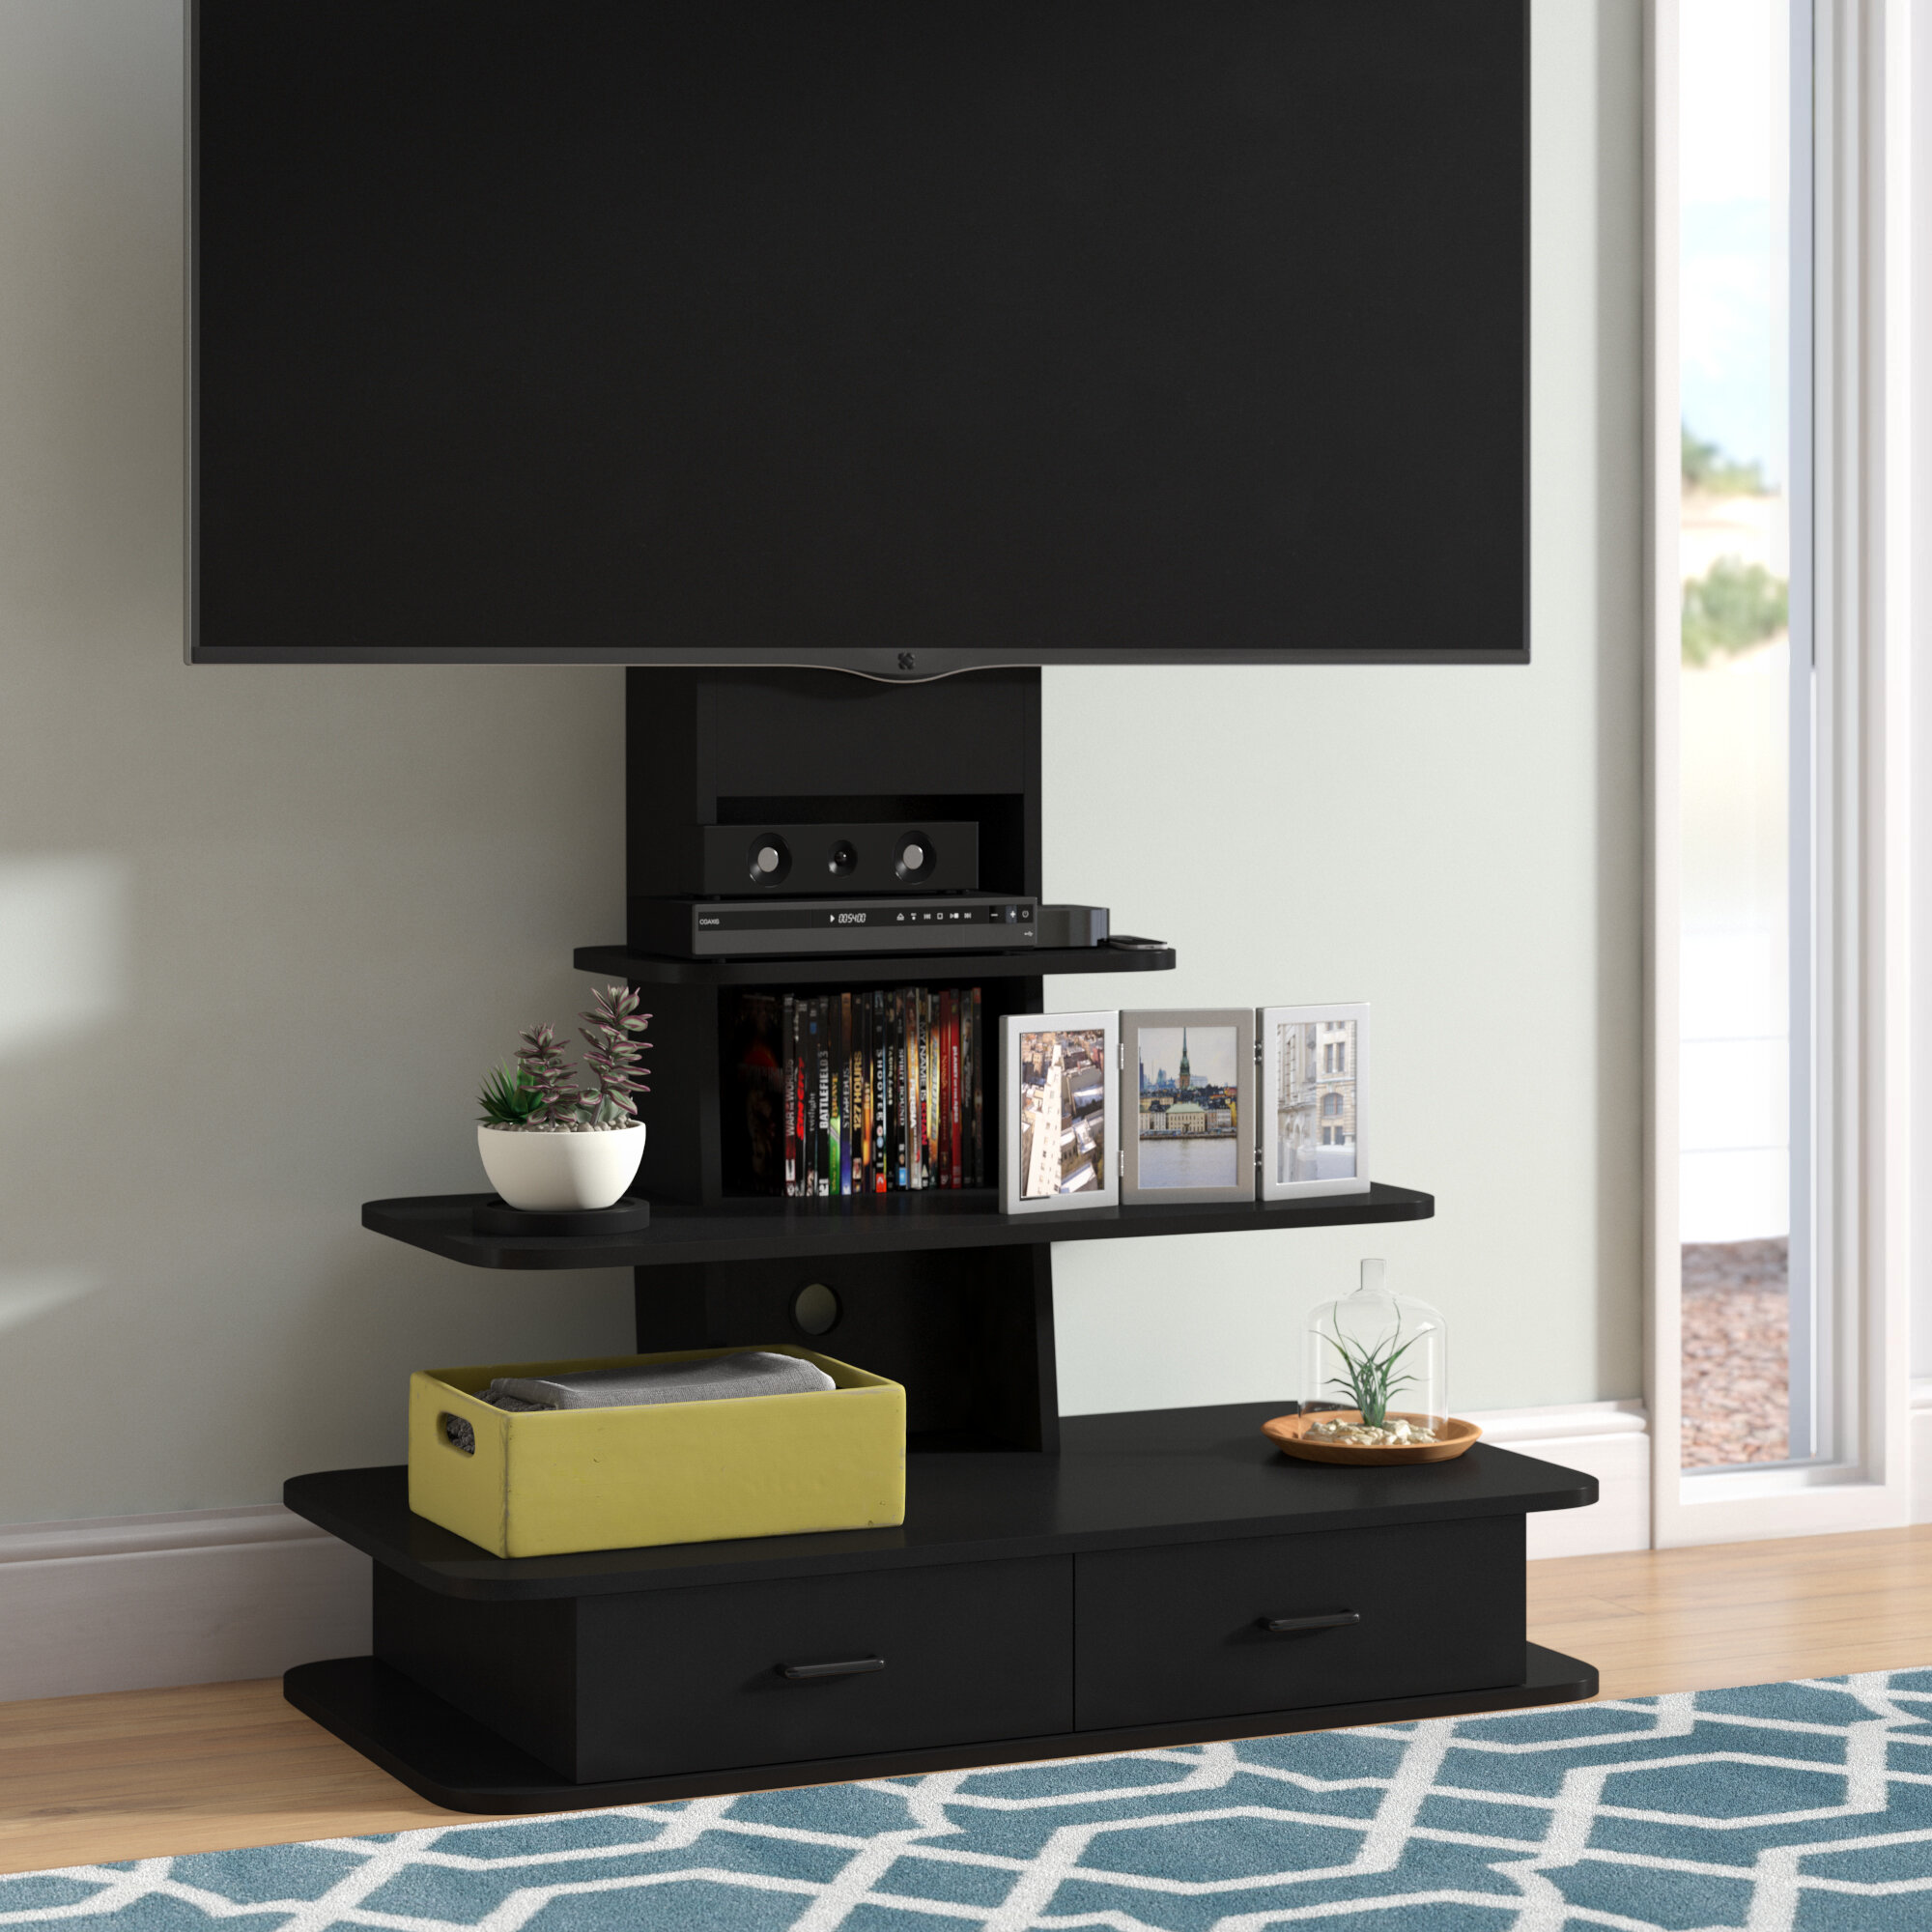 Tabletop TV Stand Mount for 26 32 33 37 42 47 50 52 55 60 65"LCD LED Flat Screen 